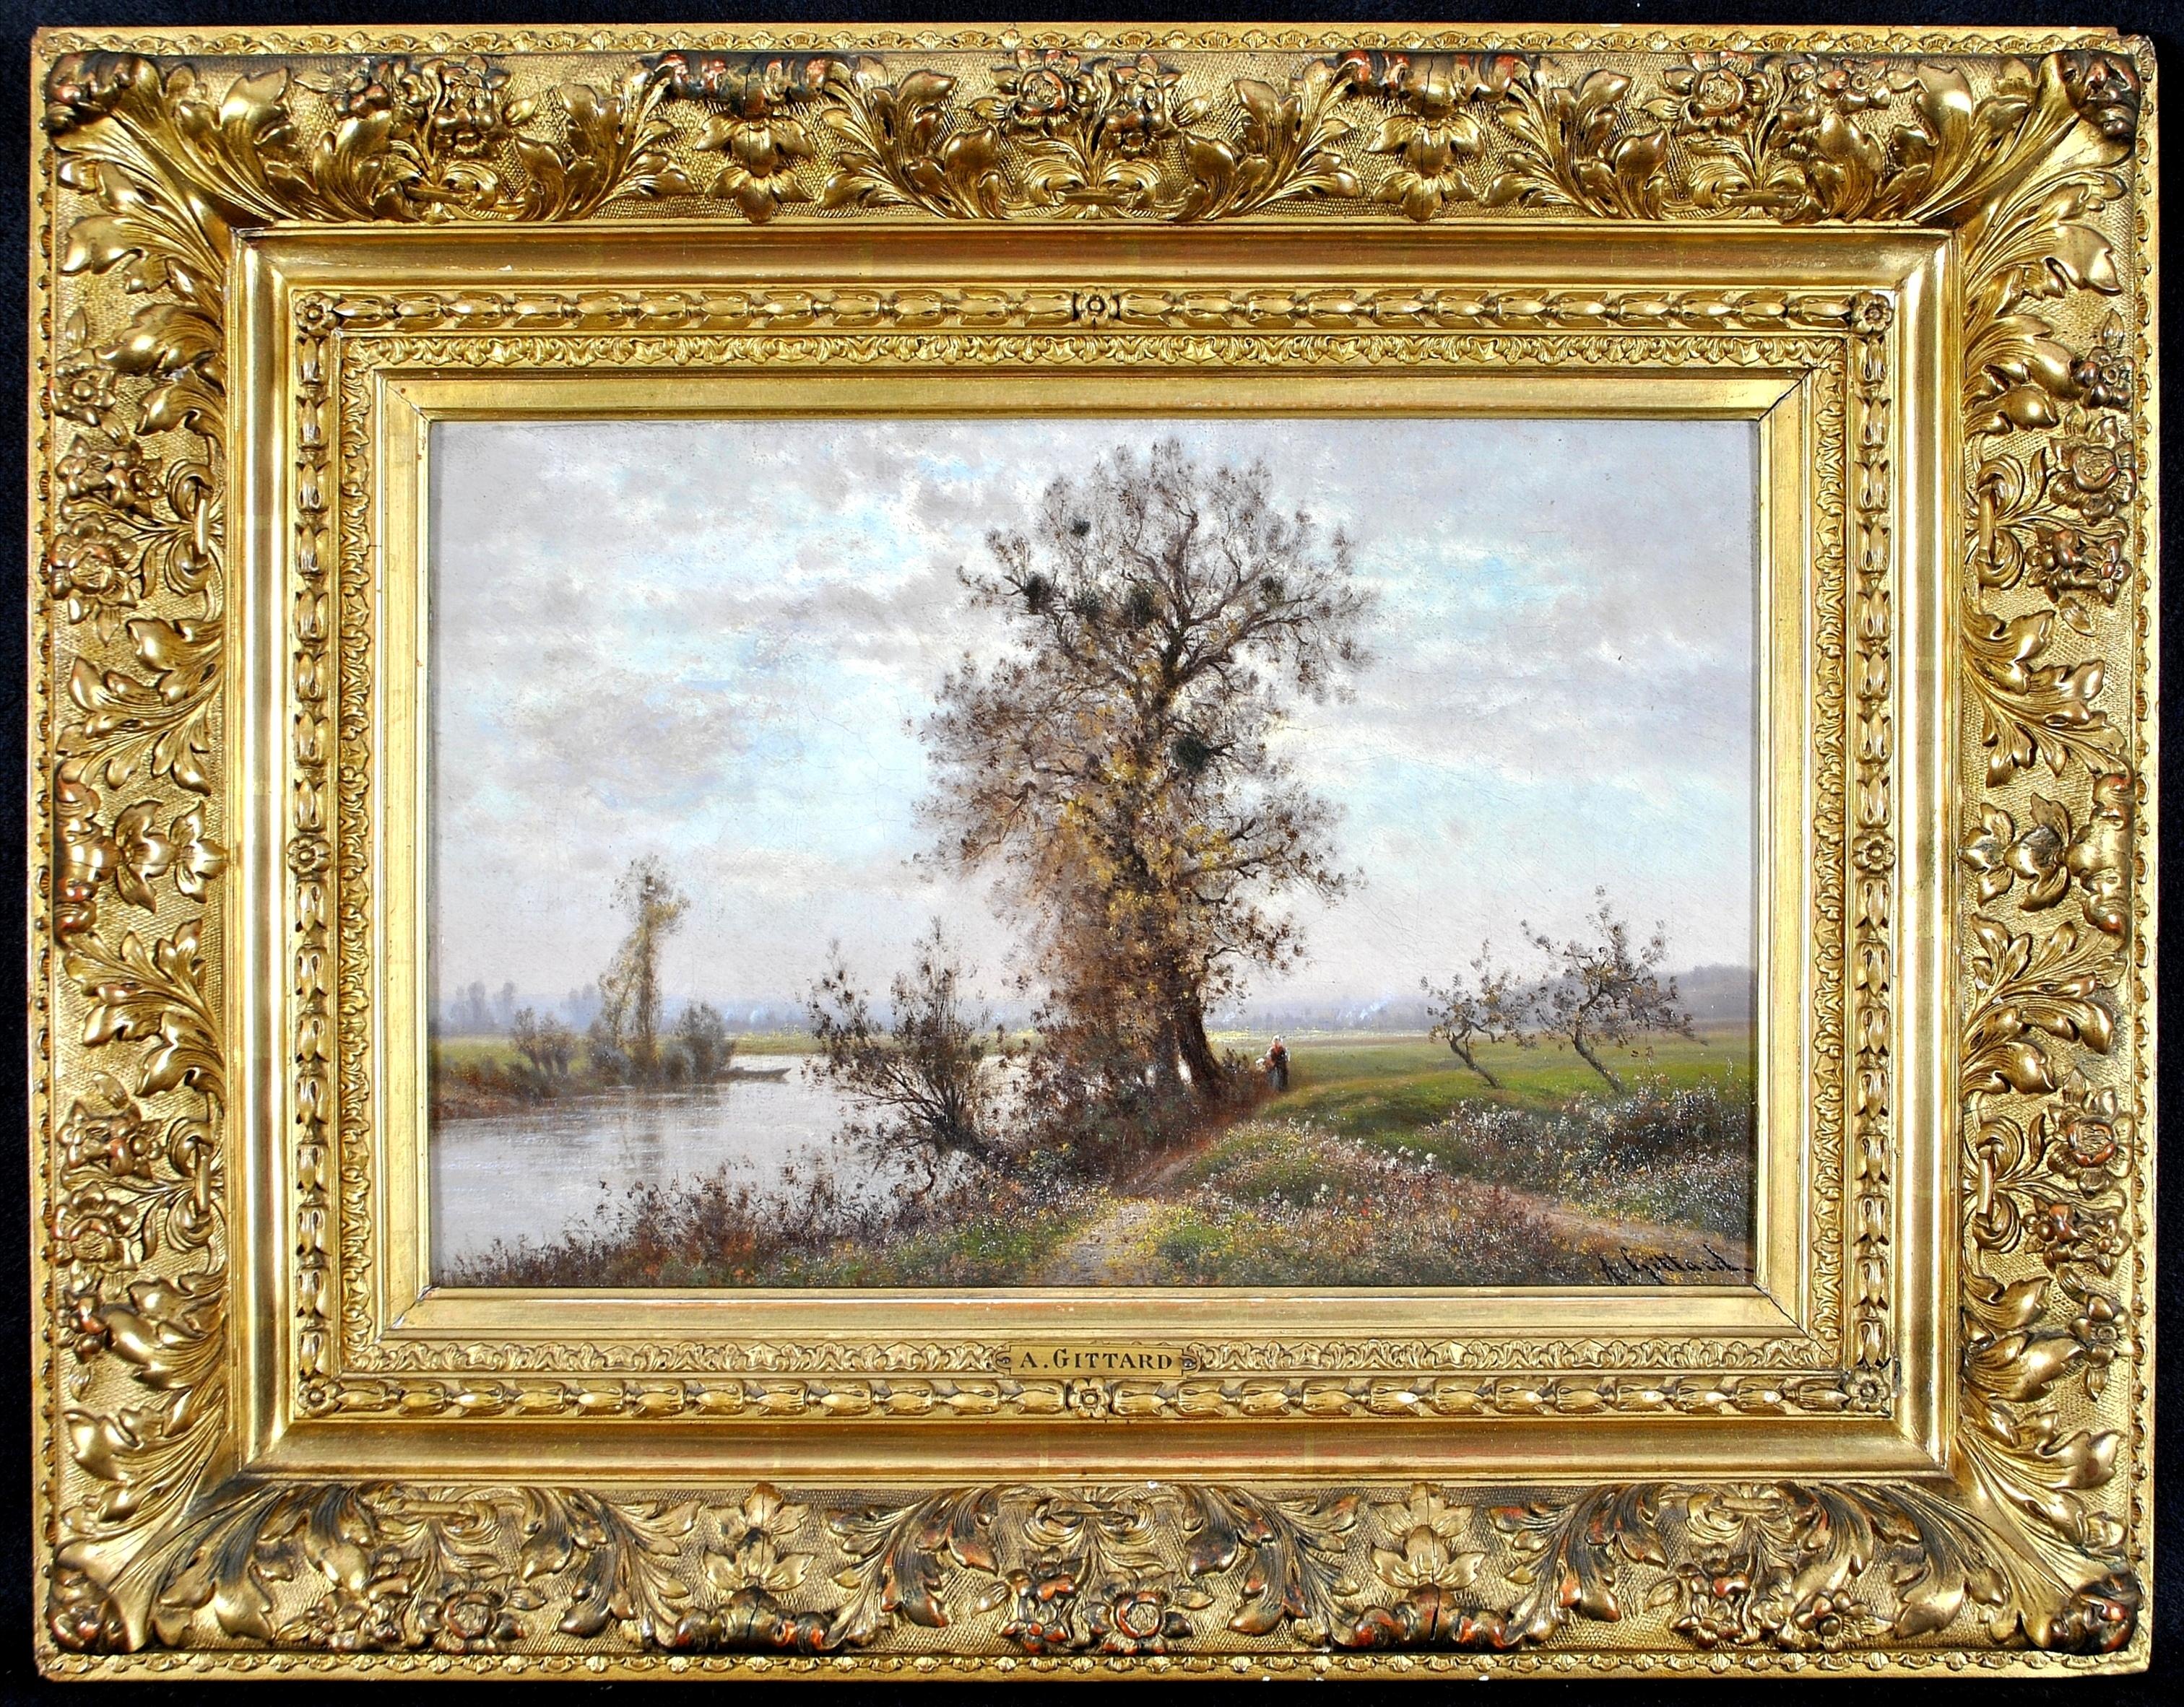 Tranquil River Landscape - 19th Century French Impressionist Oil Painting